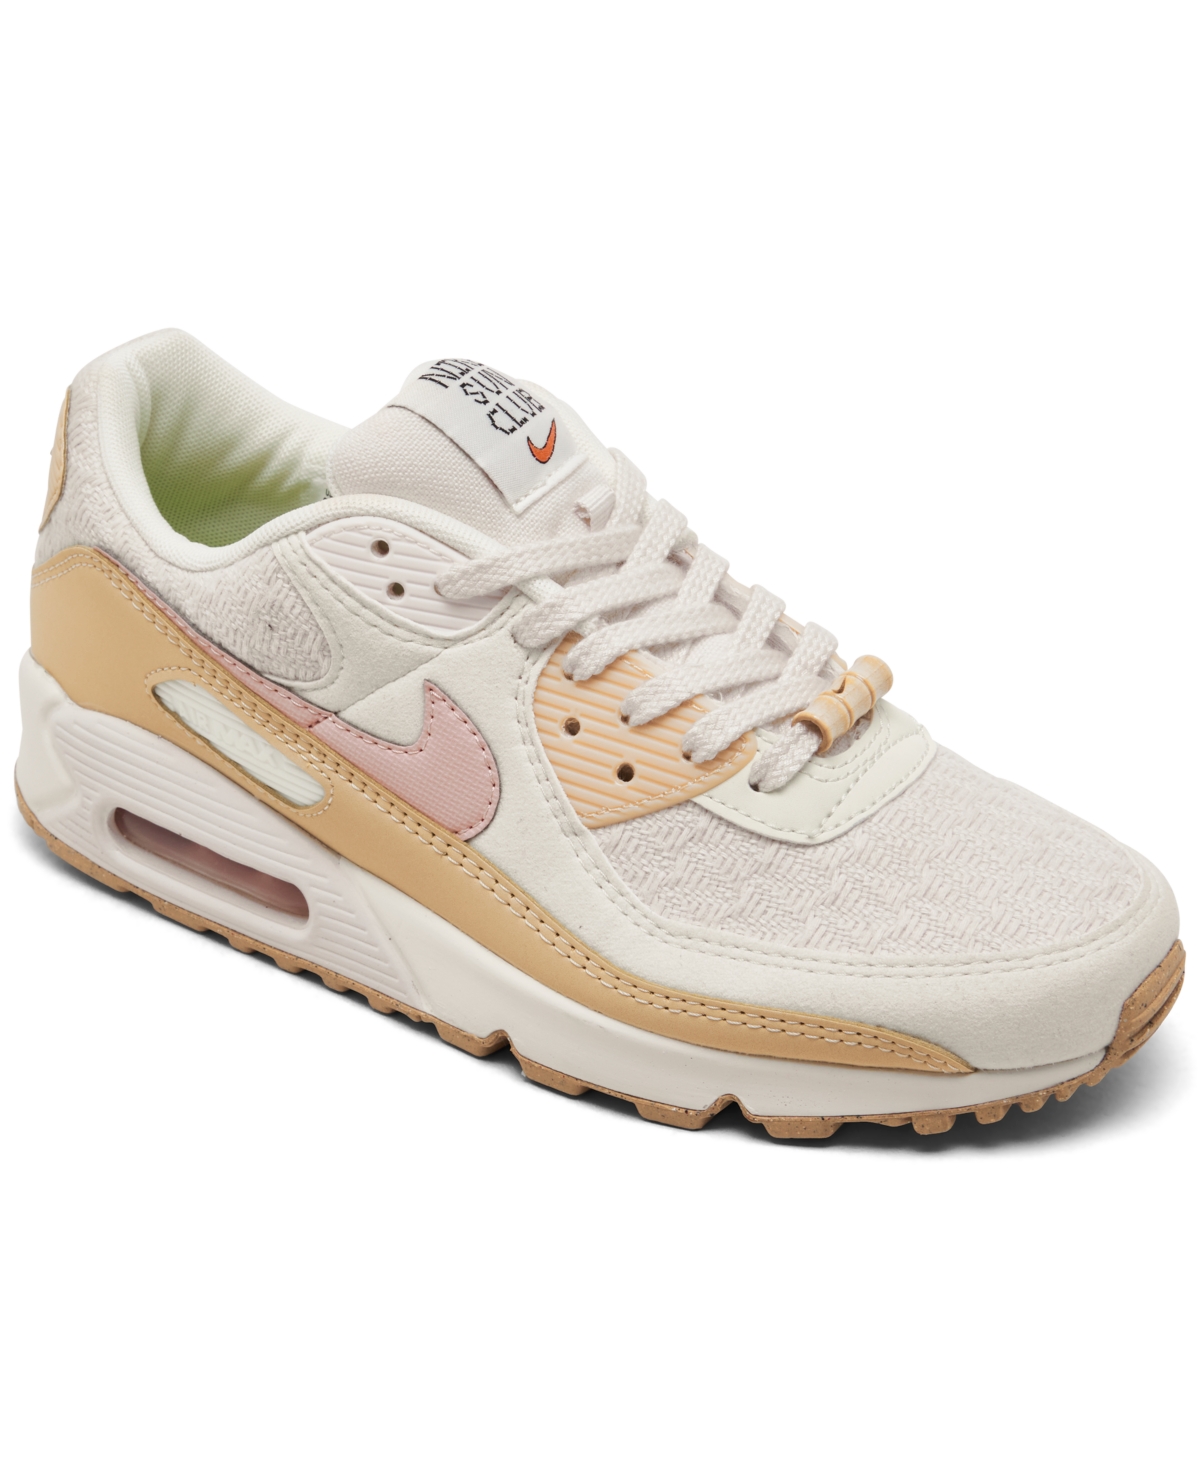 NIKE WOMEN'S AIR MAX 90 SE SUN CLUB CASUAL SNEAKERS FROM FINISH LINE